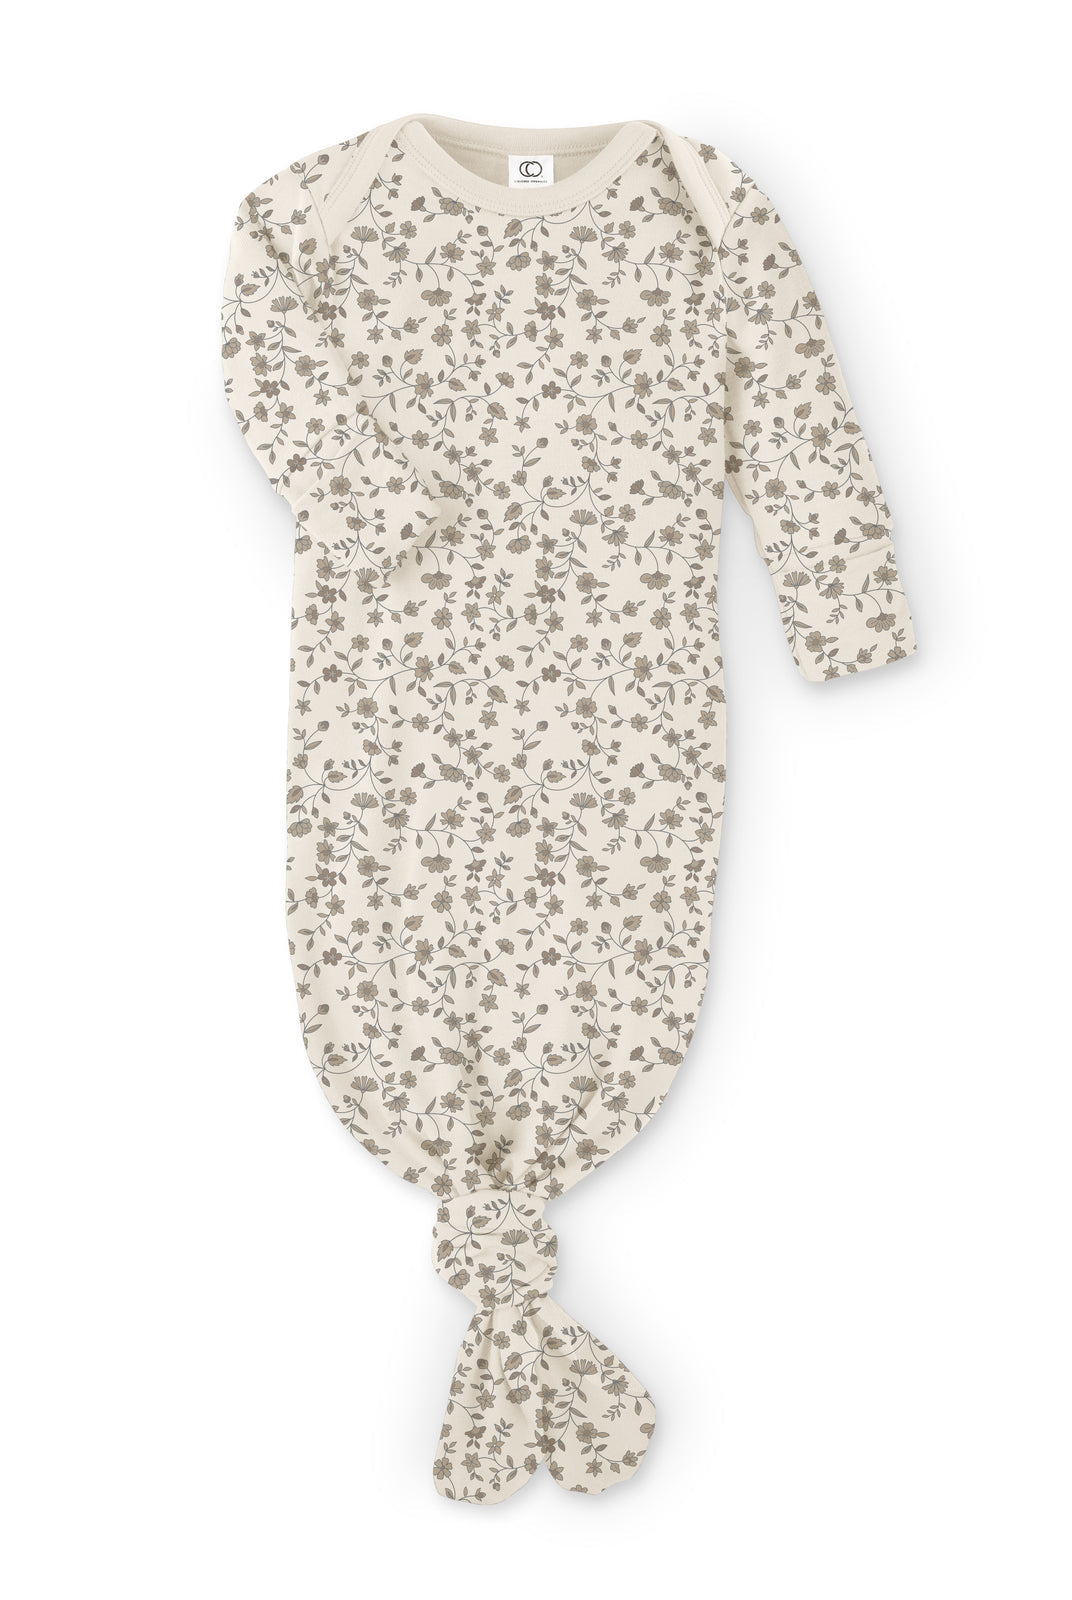 
  
  Colored Organics Landry Gown- Baby
  
